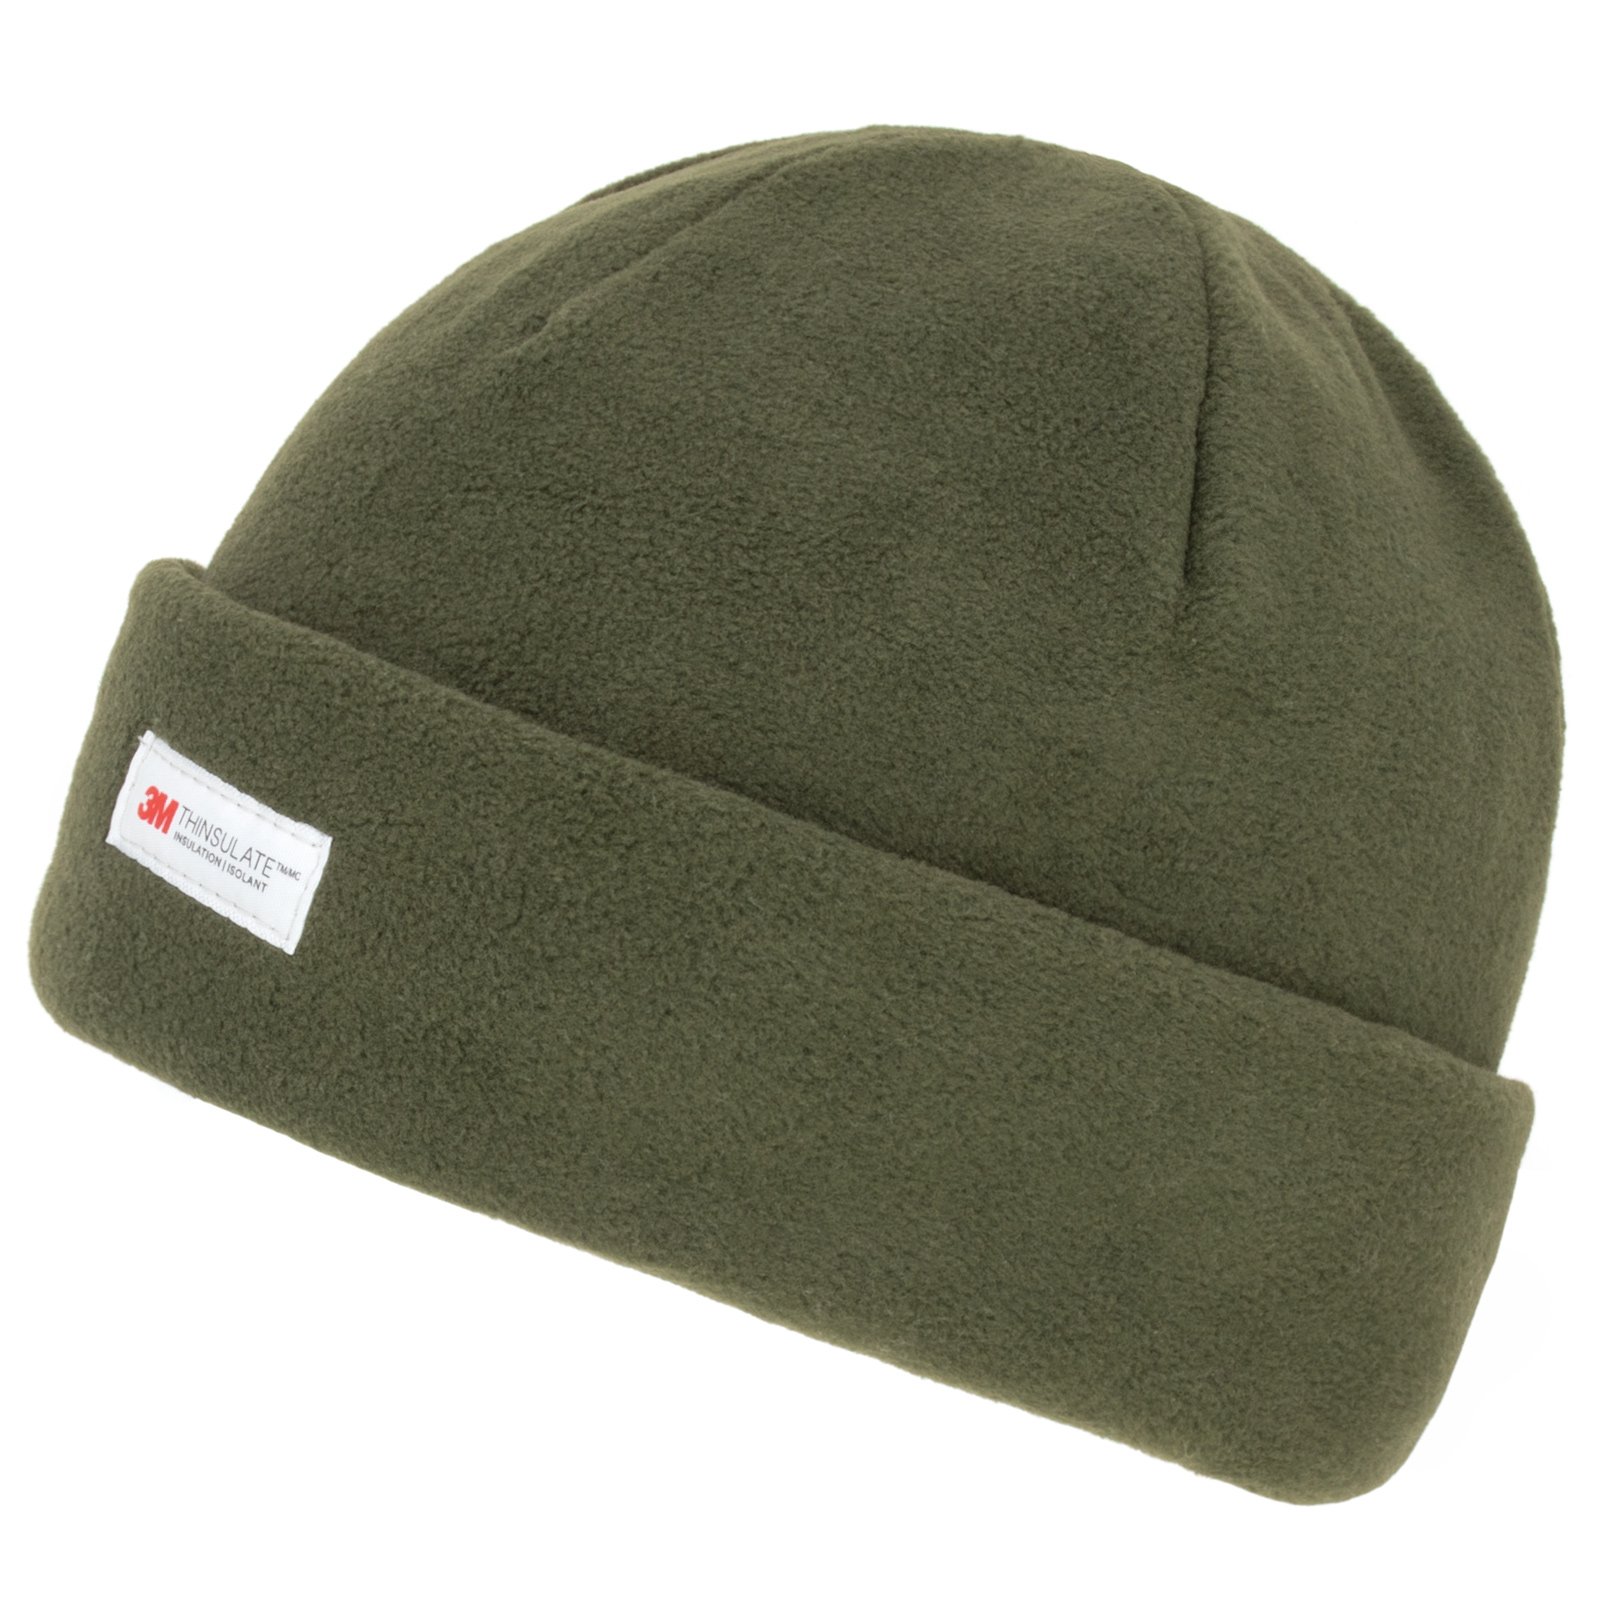 3M Thinsulate Watch Cap | Central Alberta Military Outlet